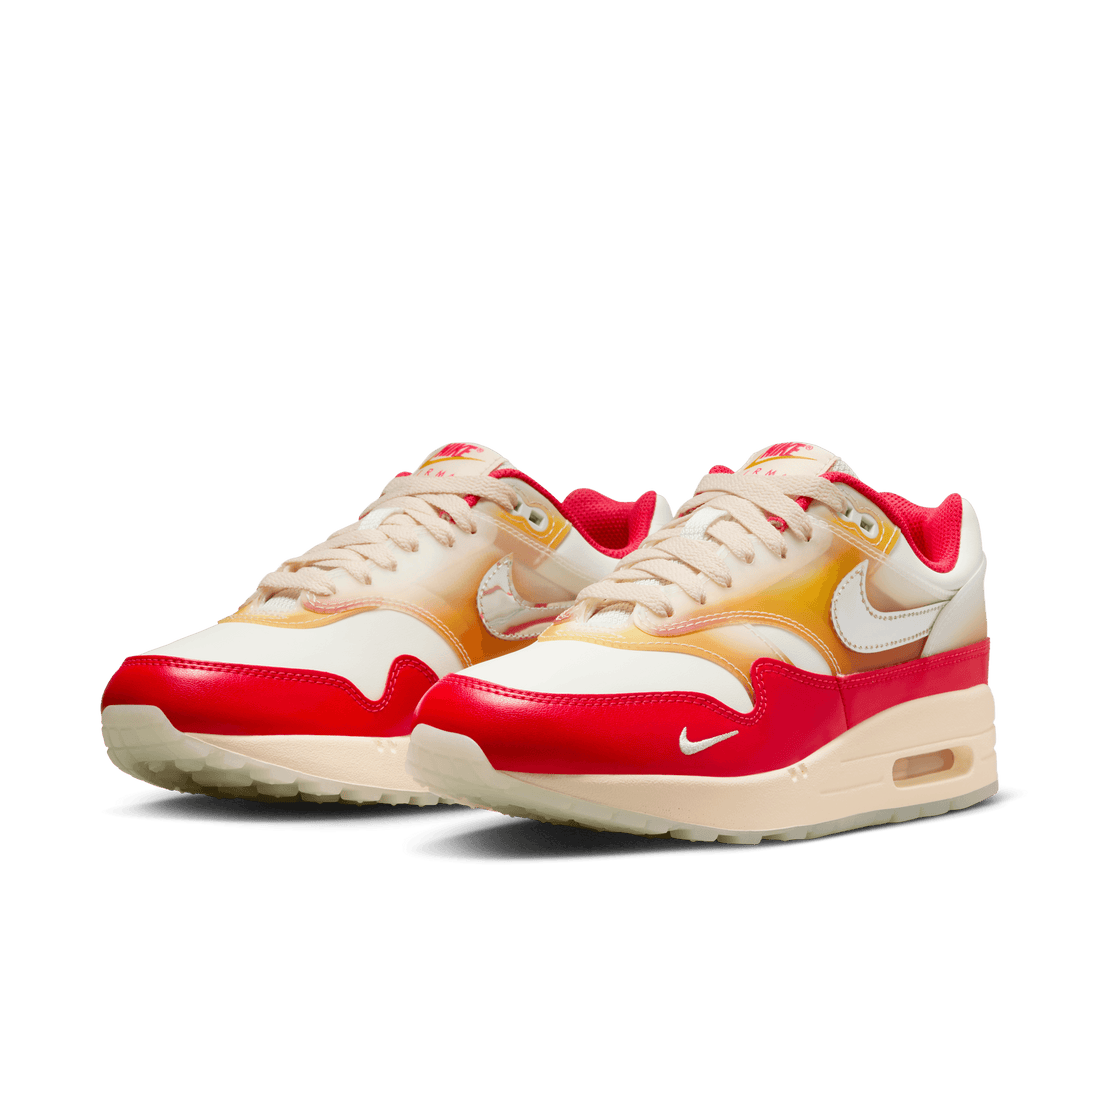 Amazingly Collectible: Discovering the Wonders of Nike Women's Air Max '87 Premium Sofvi